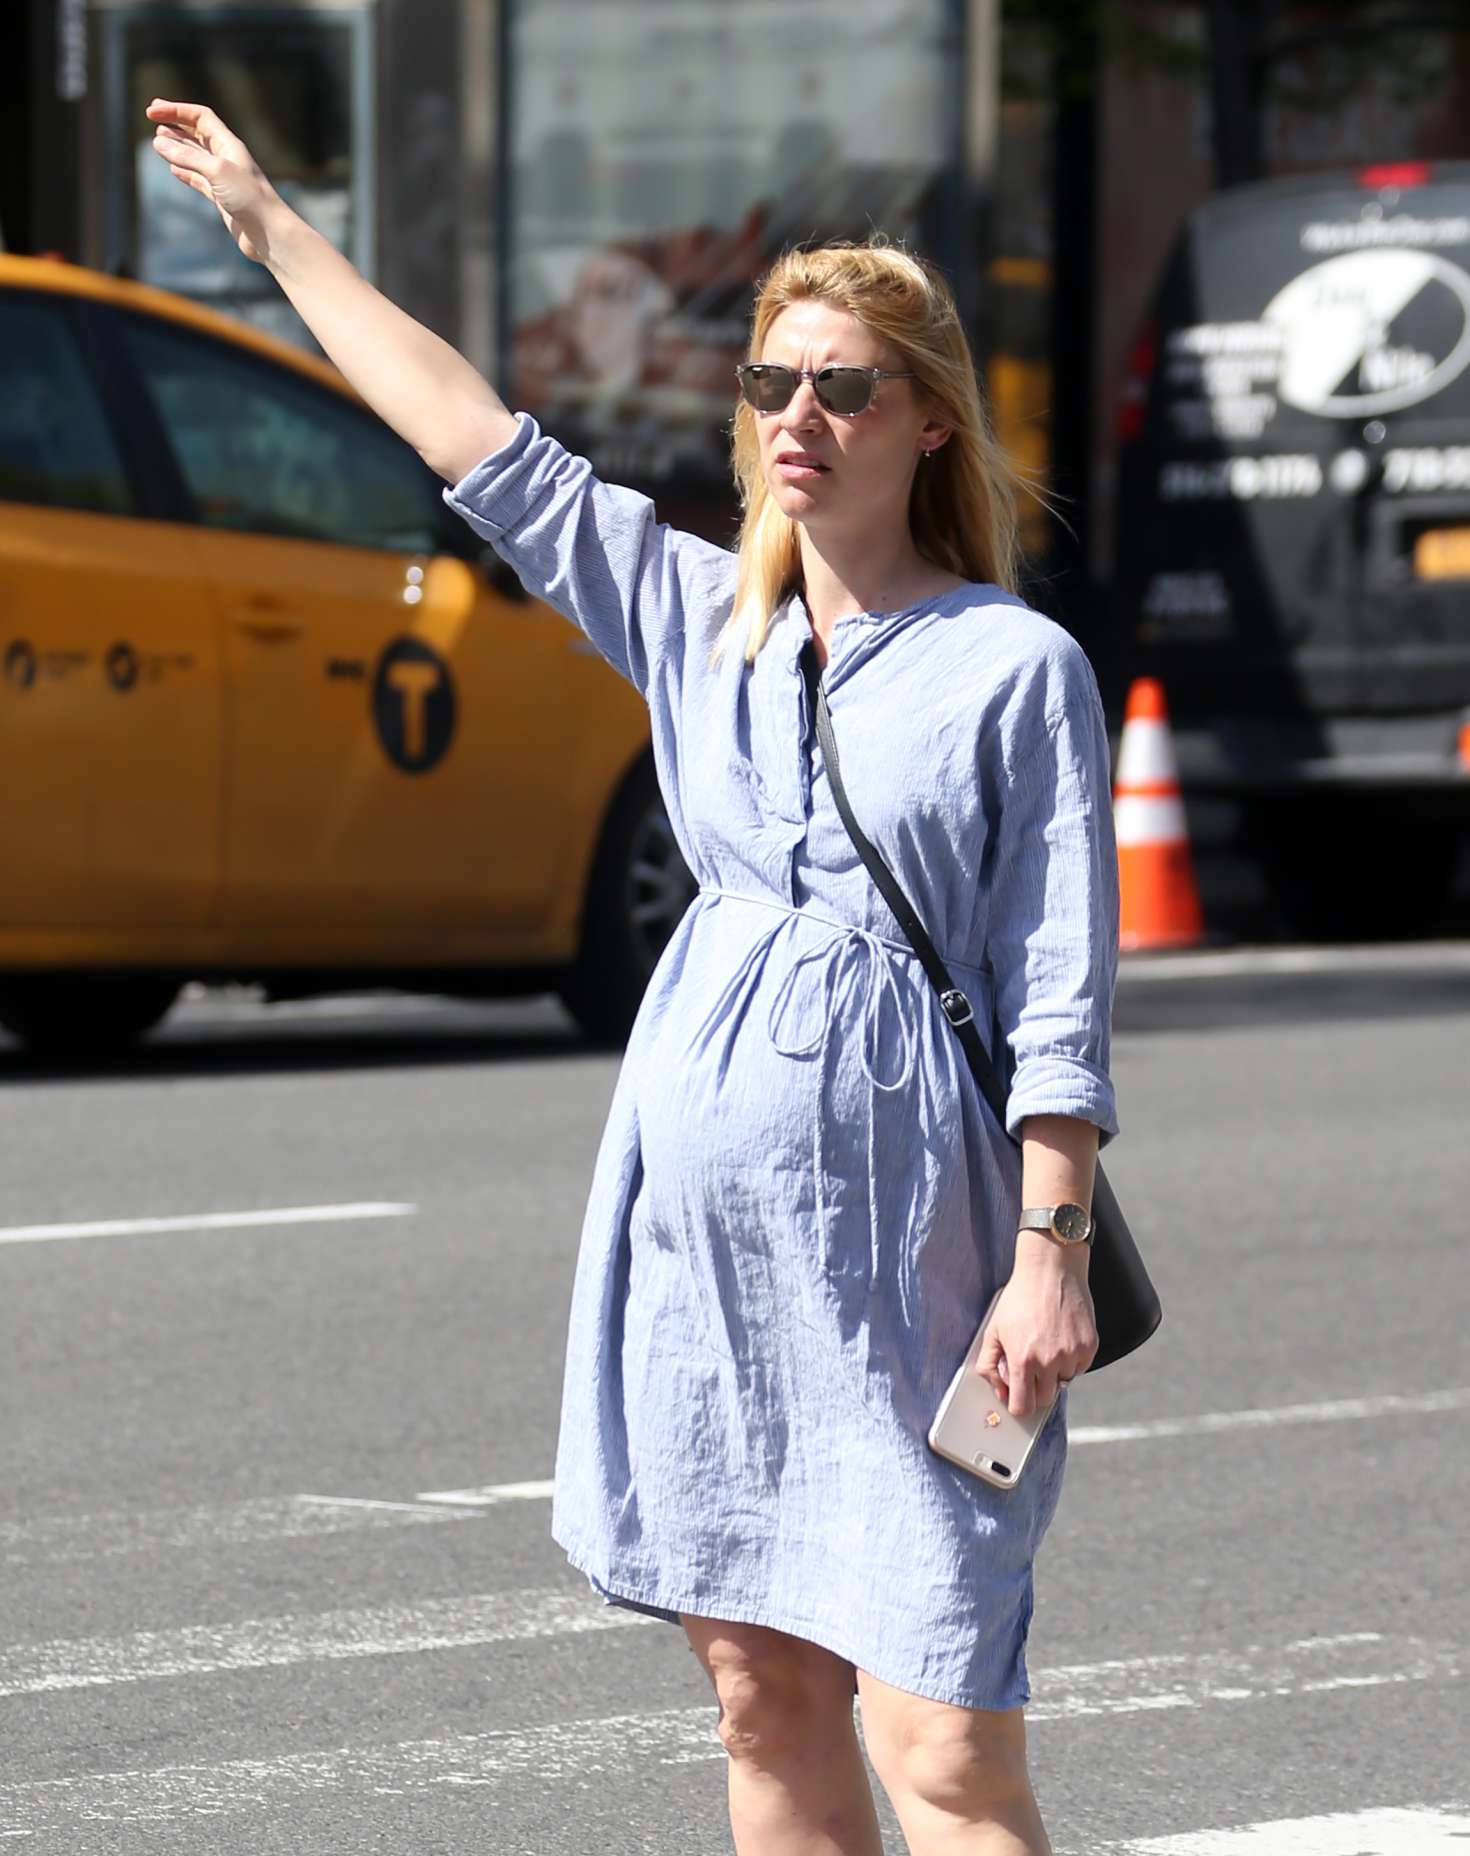 Claire Danes - Hail a cab in New York City